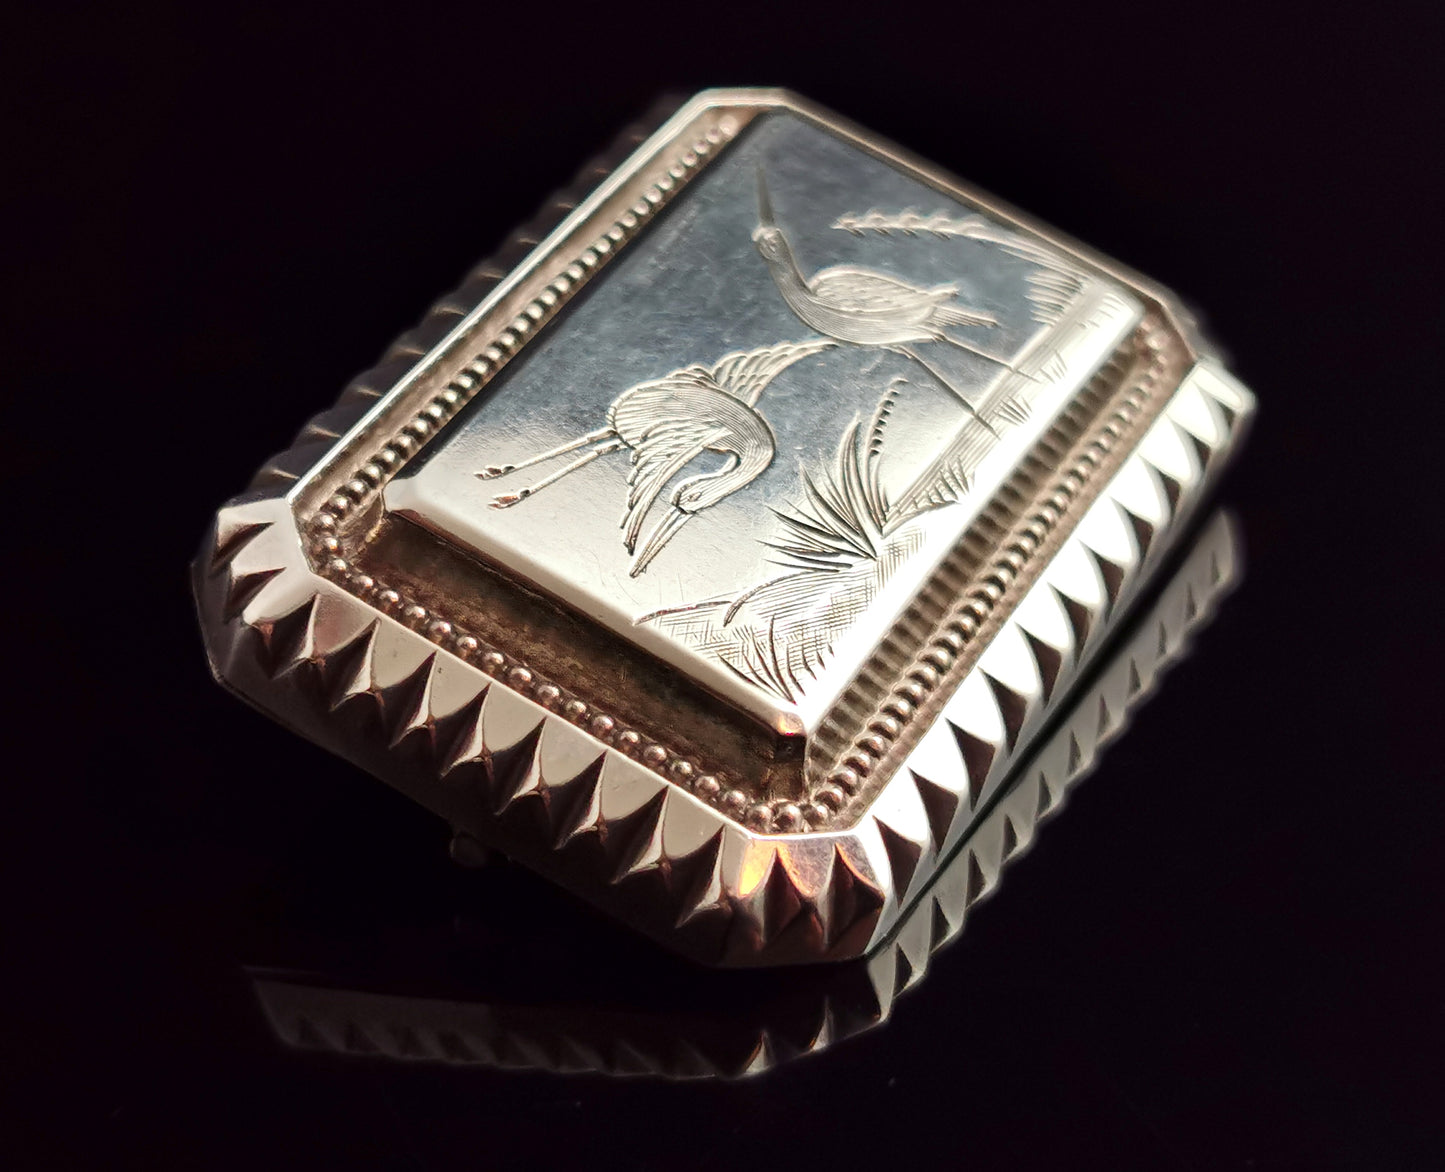 Antique Victorian Aesthetic silver brooch, Herons